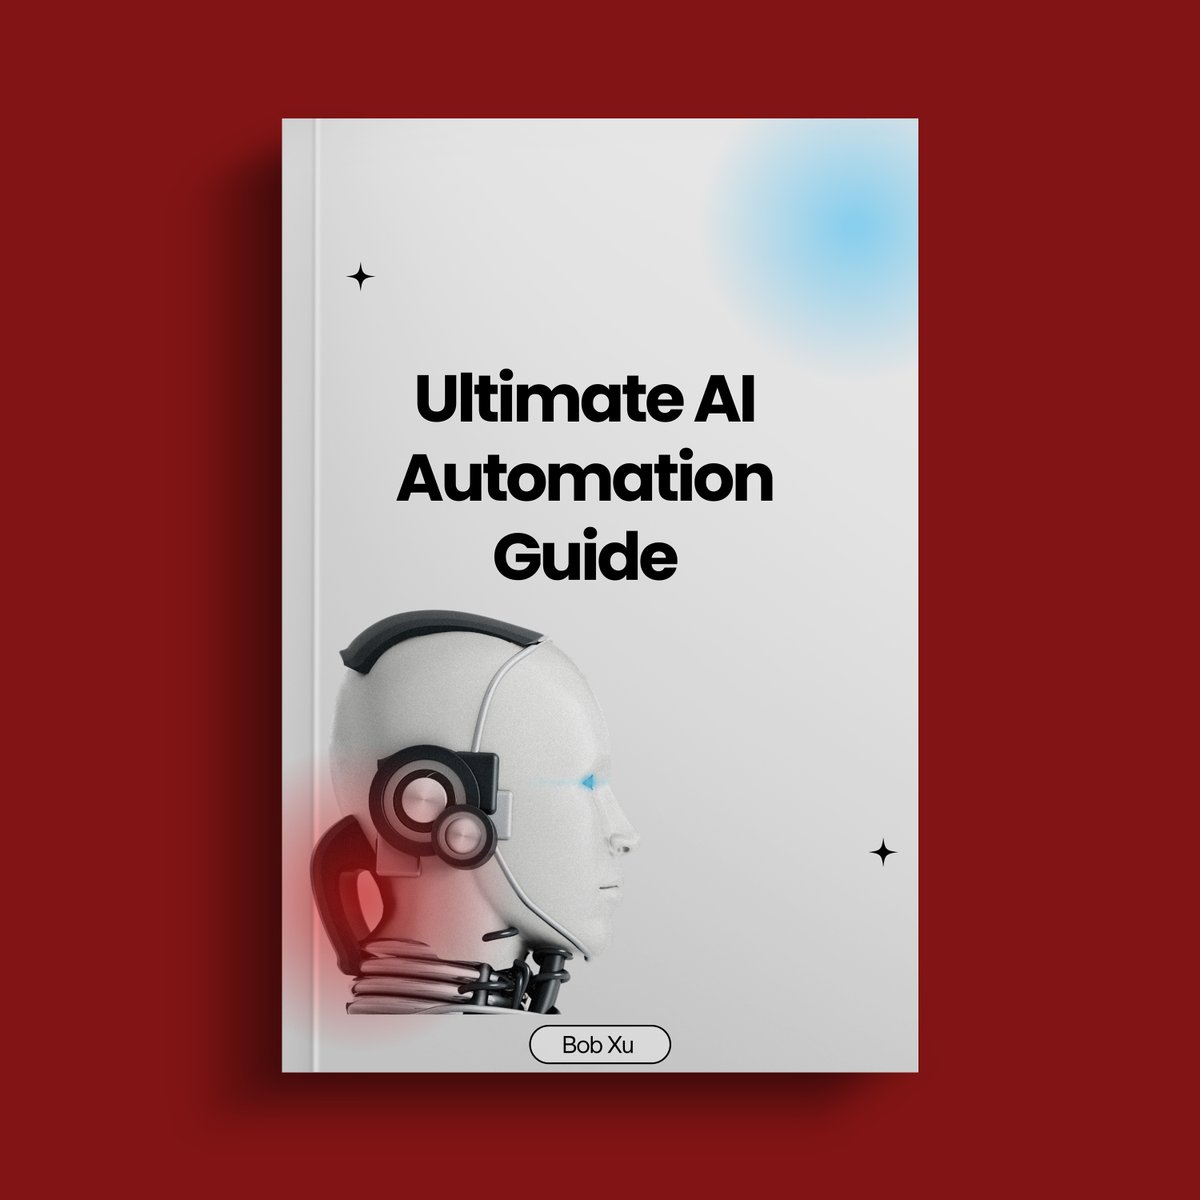 Time is Money. AI Automation can save you 100s of hours. Grab the “Ultimate AI Automation Guide” And make more money by saving time. It’s worth $99. But 100% FREE for 24/hrs. To get it: 1. Like & Repost 2. Reply “send” 3. Follow me (So I can DM)